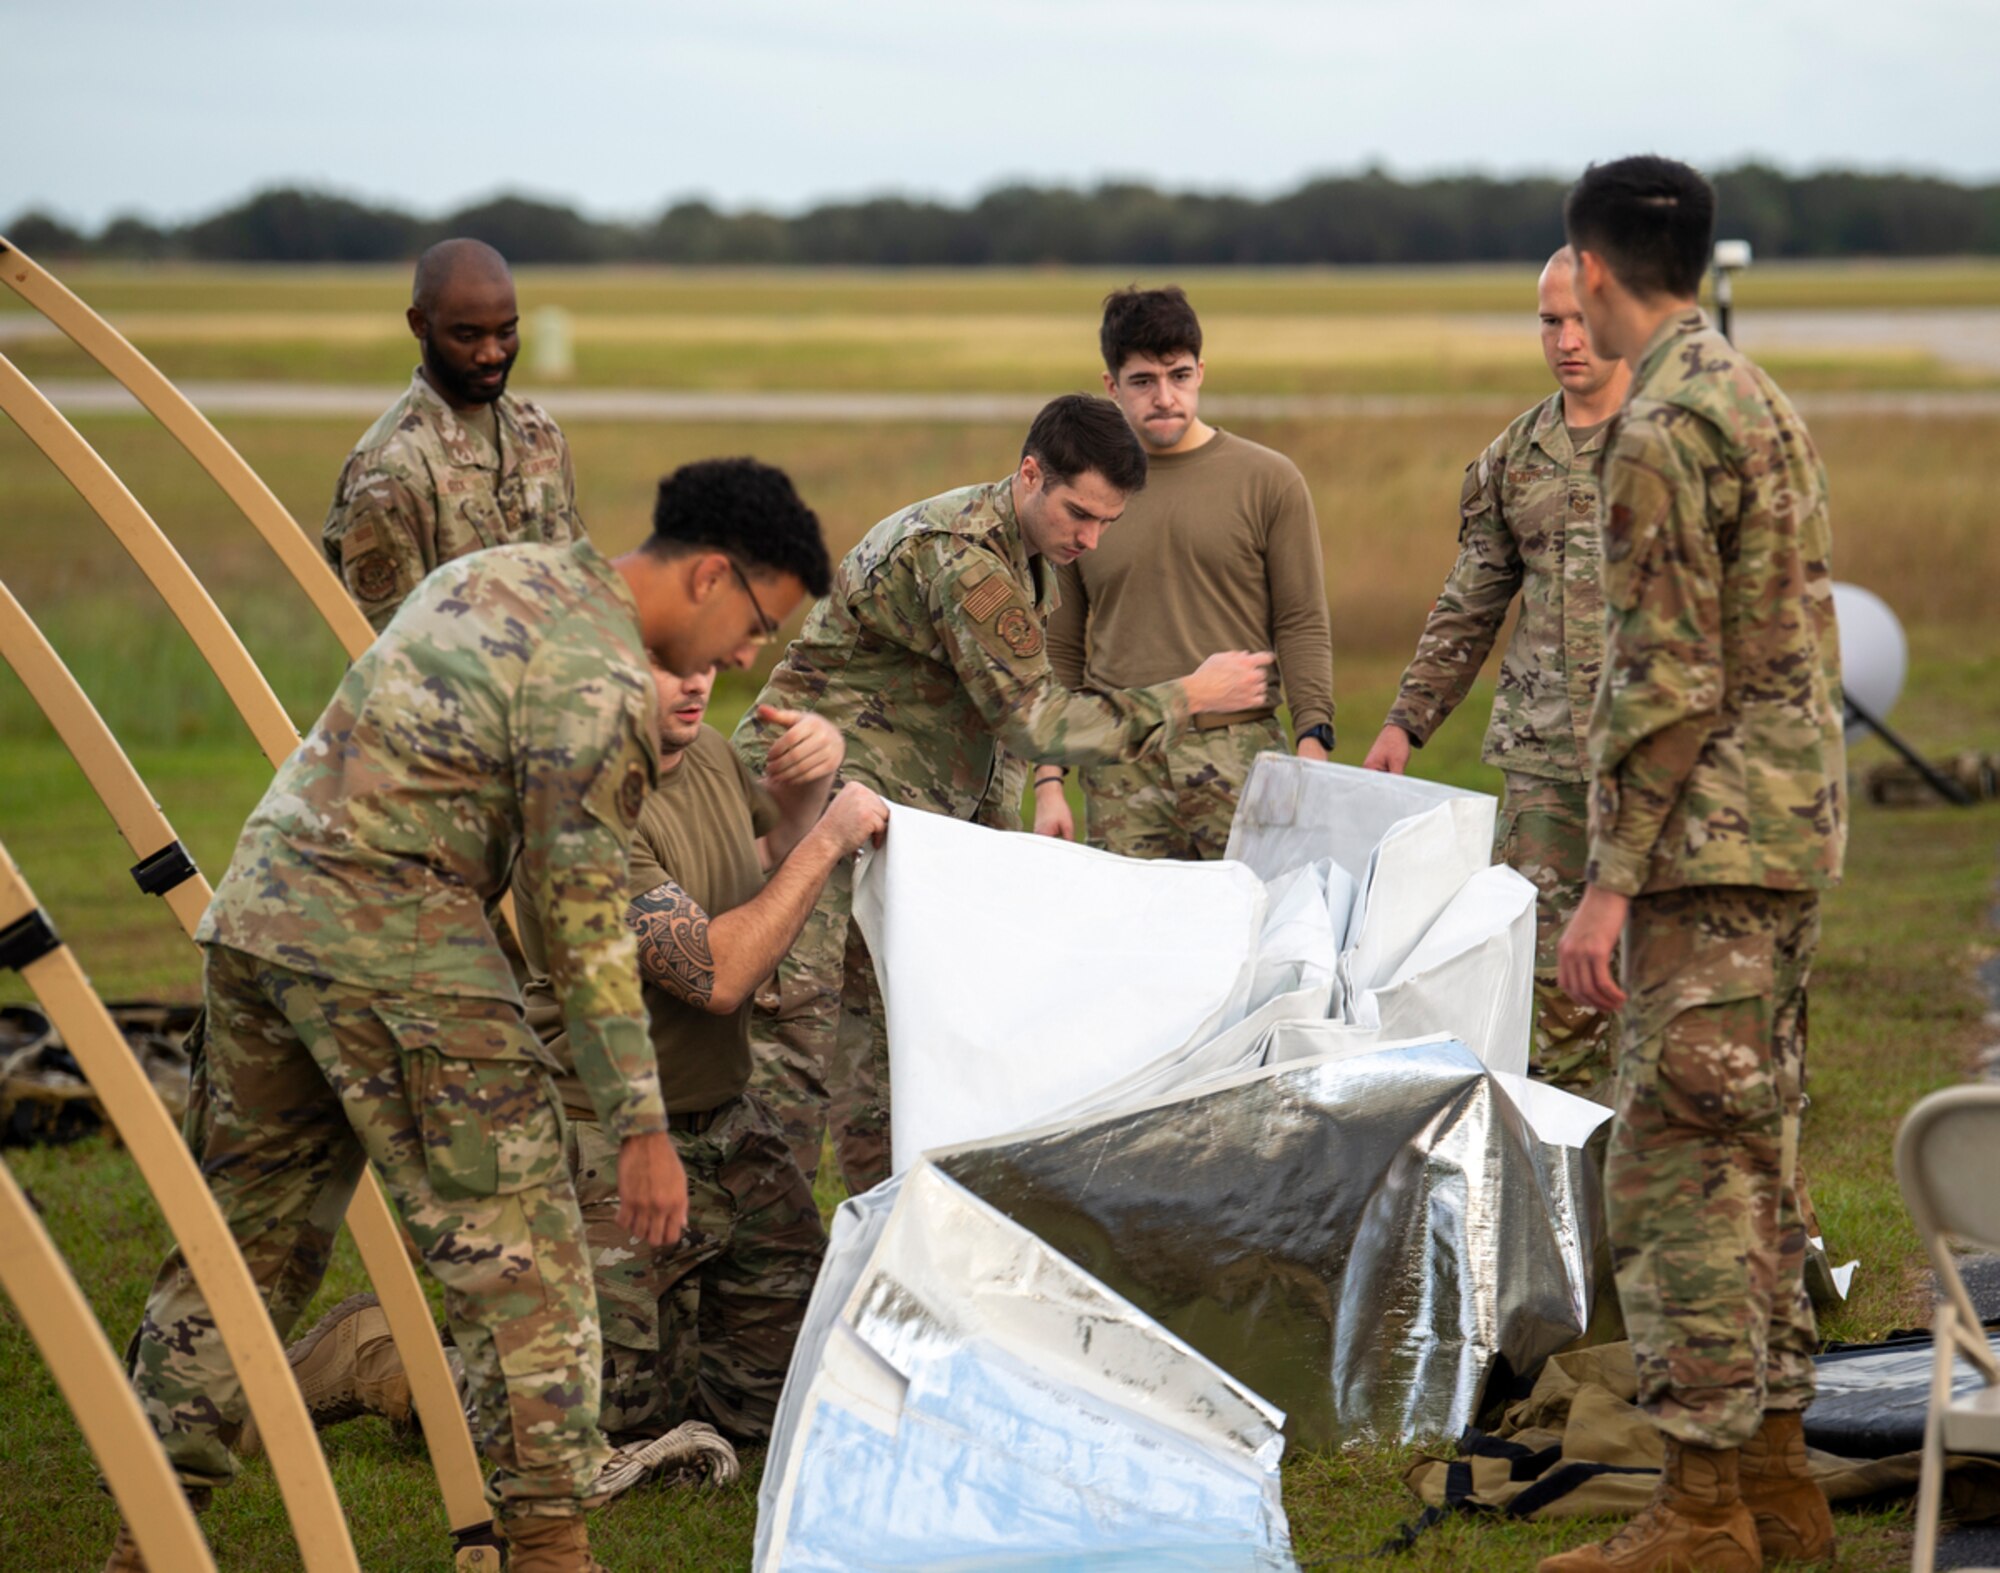 Mosaic Tiger 24-1 participants build a command and control tent at Avon Park Air Force Range, Florida, Nov. 13, 2023. In a contested environment with degraded communication, mission command is essential via clear communication of intent, understanding and trust. (U.S. Air Force photo by Airman 1st Class Leonid Soubbotine)